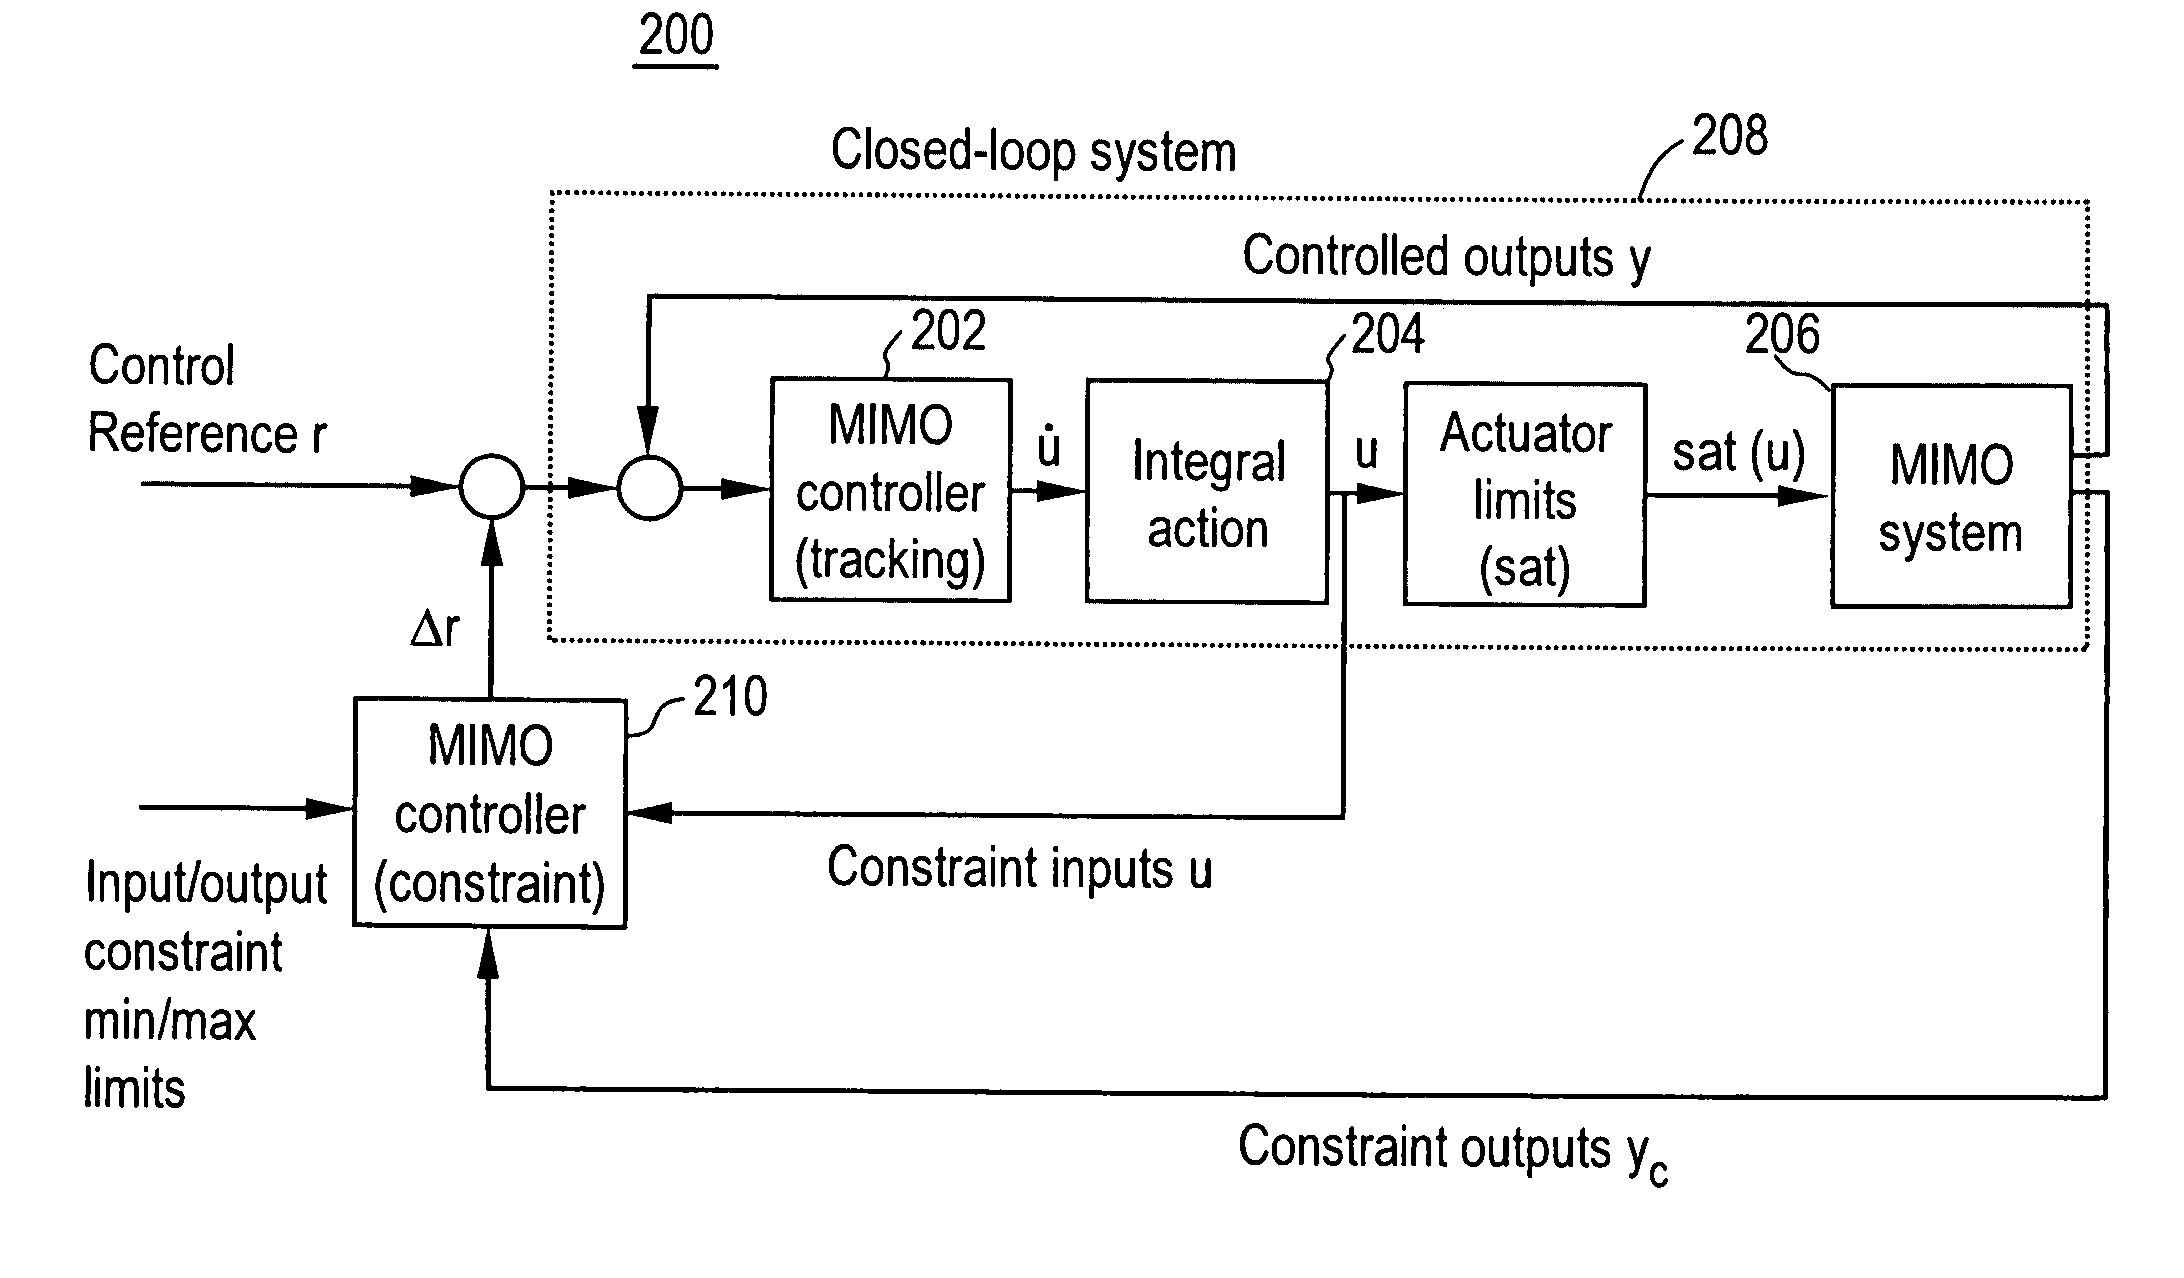 Multivariable controller design method for multiple input/outputs systems with multiple input/output constraints